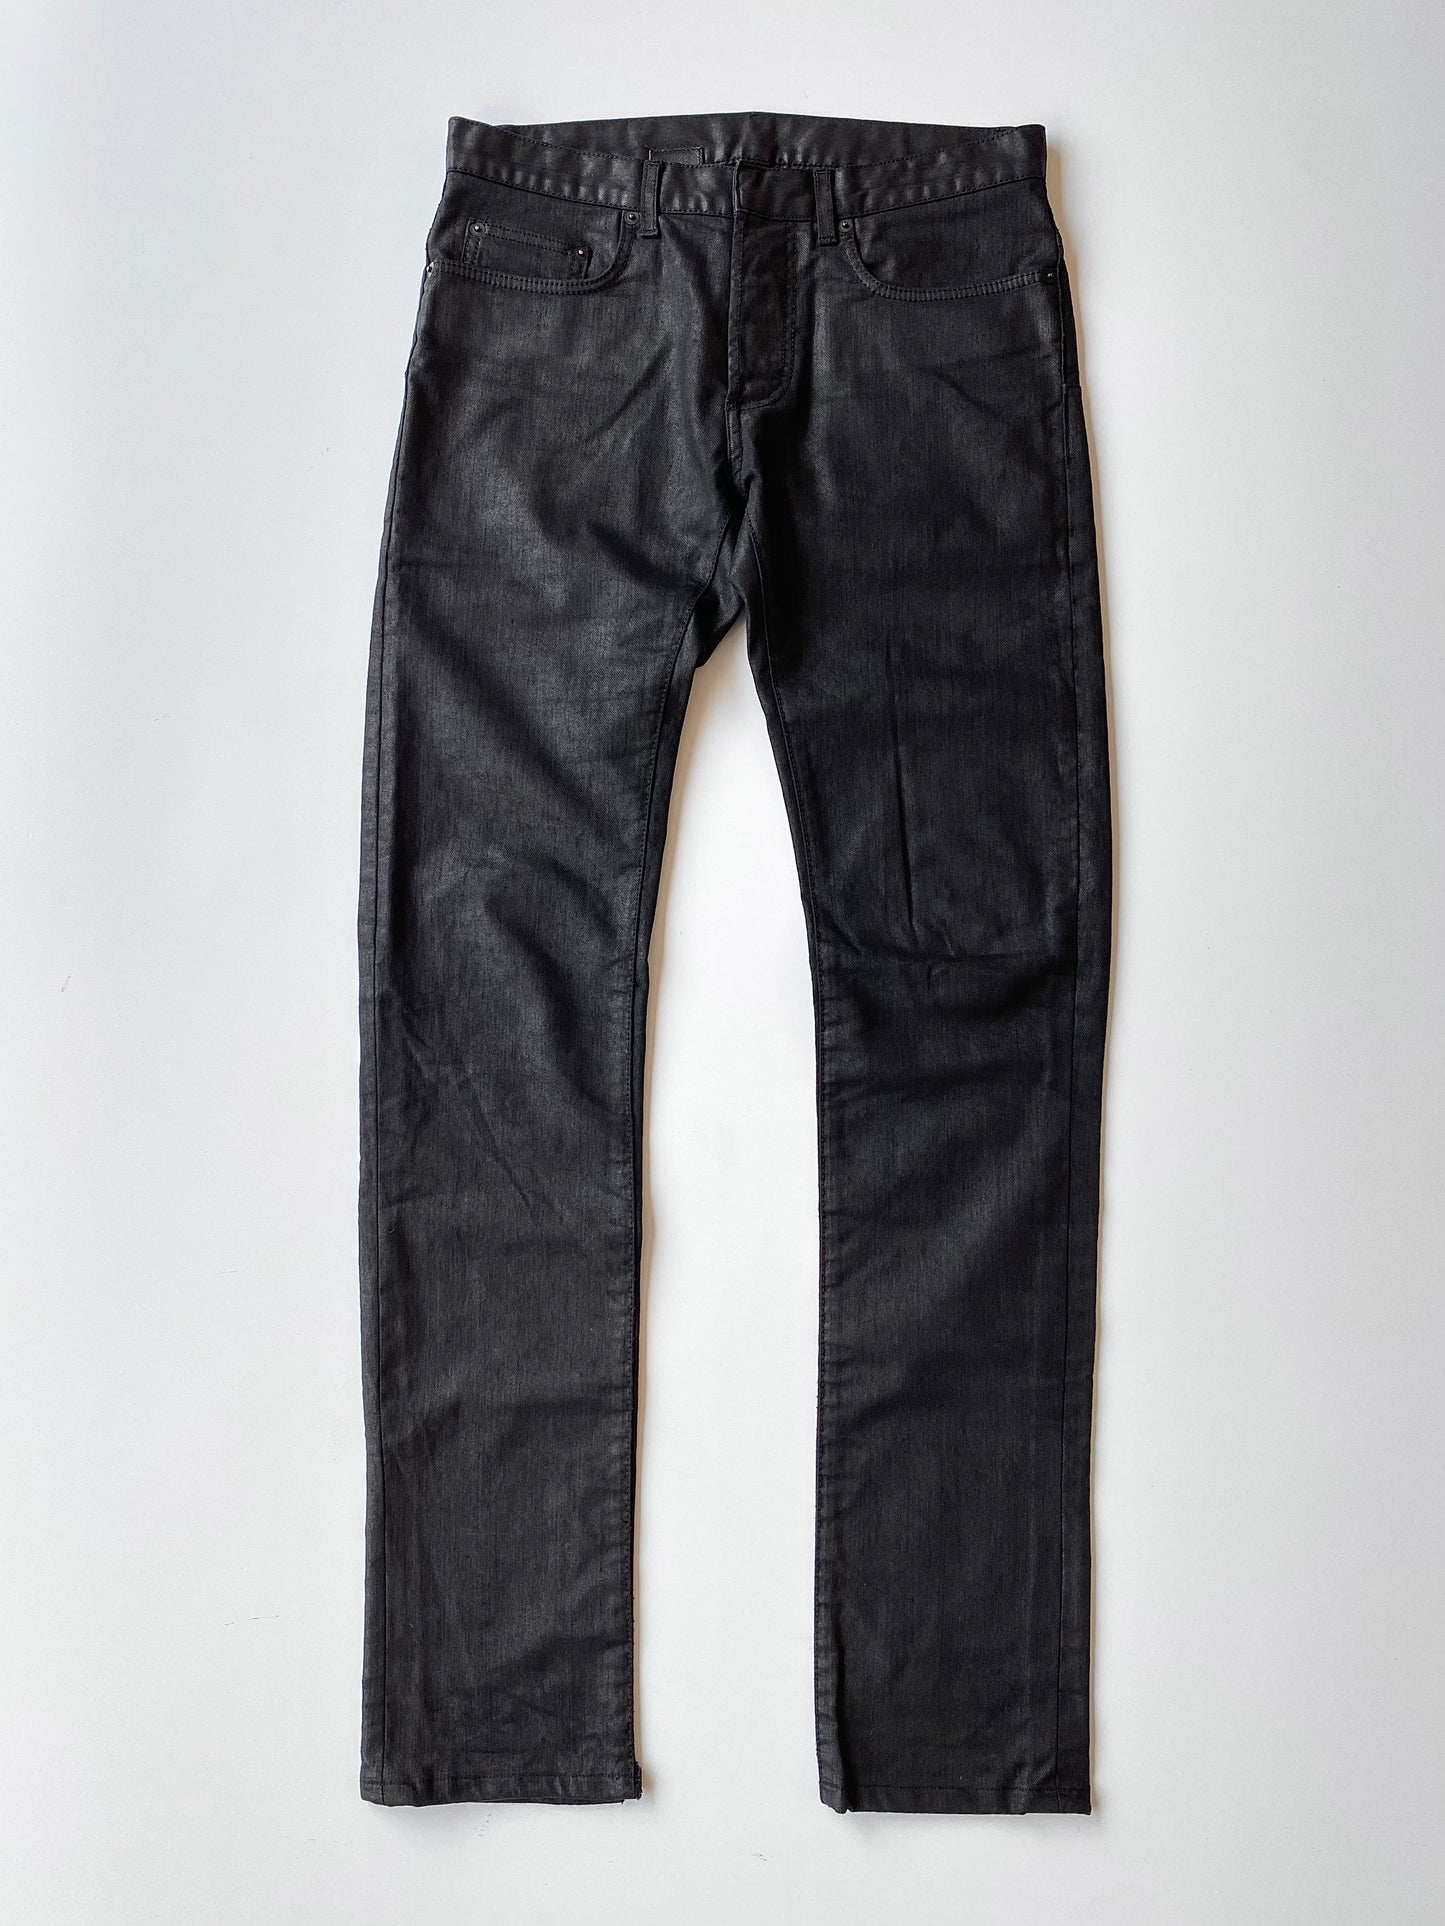 Dior Homme A/W 2007 Wax Coated Denim Jeans